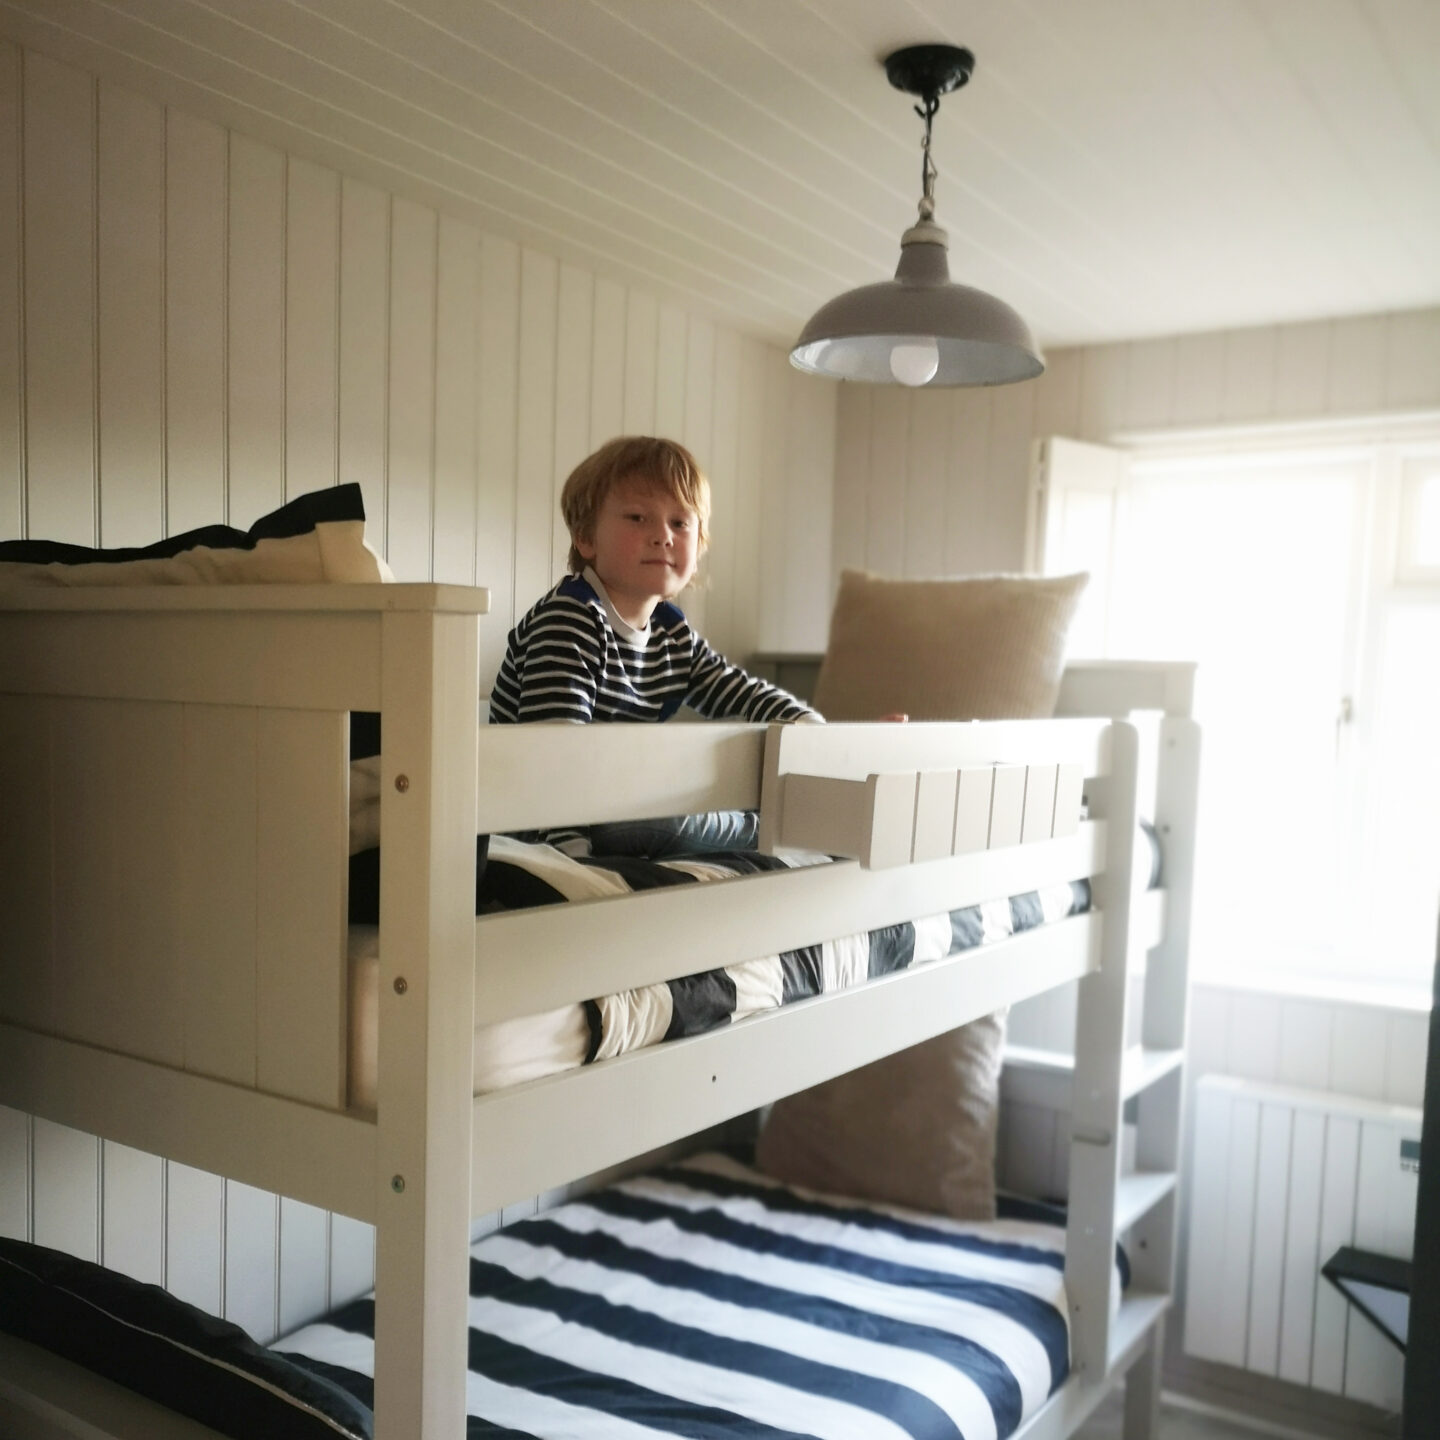 Cloud Cabin In Camber Sands, Family Break, Family Staycation, Seaside Break, Camber Sands, Rental House Review, the Frenchie Mummy, East Sussex